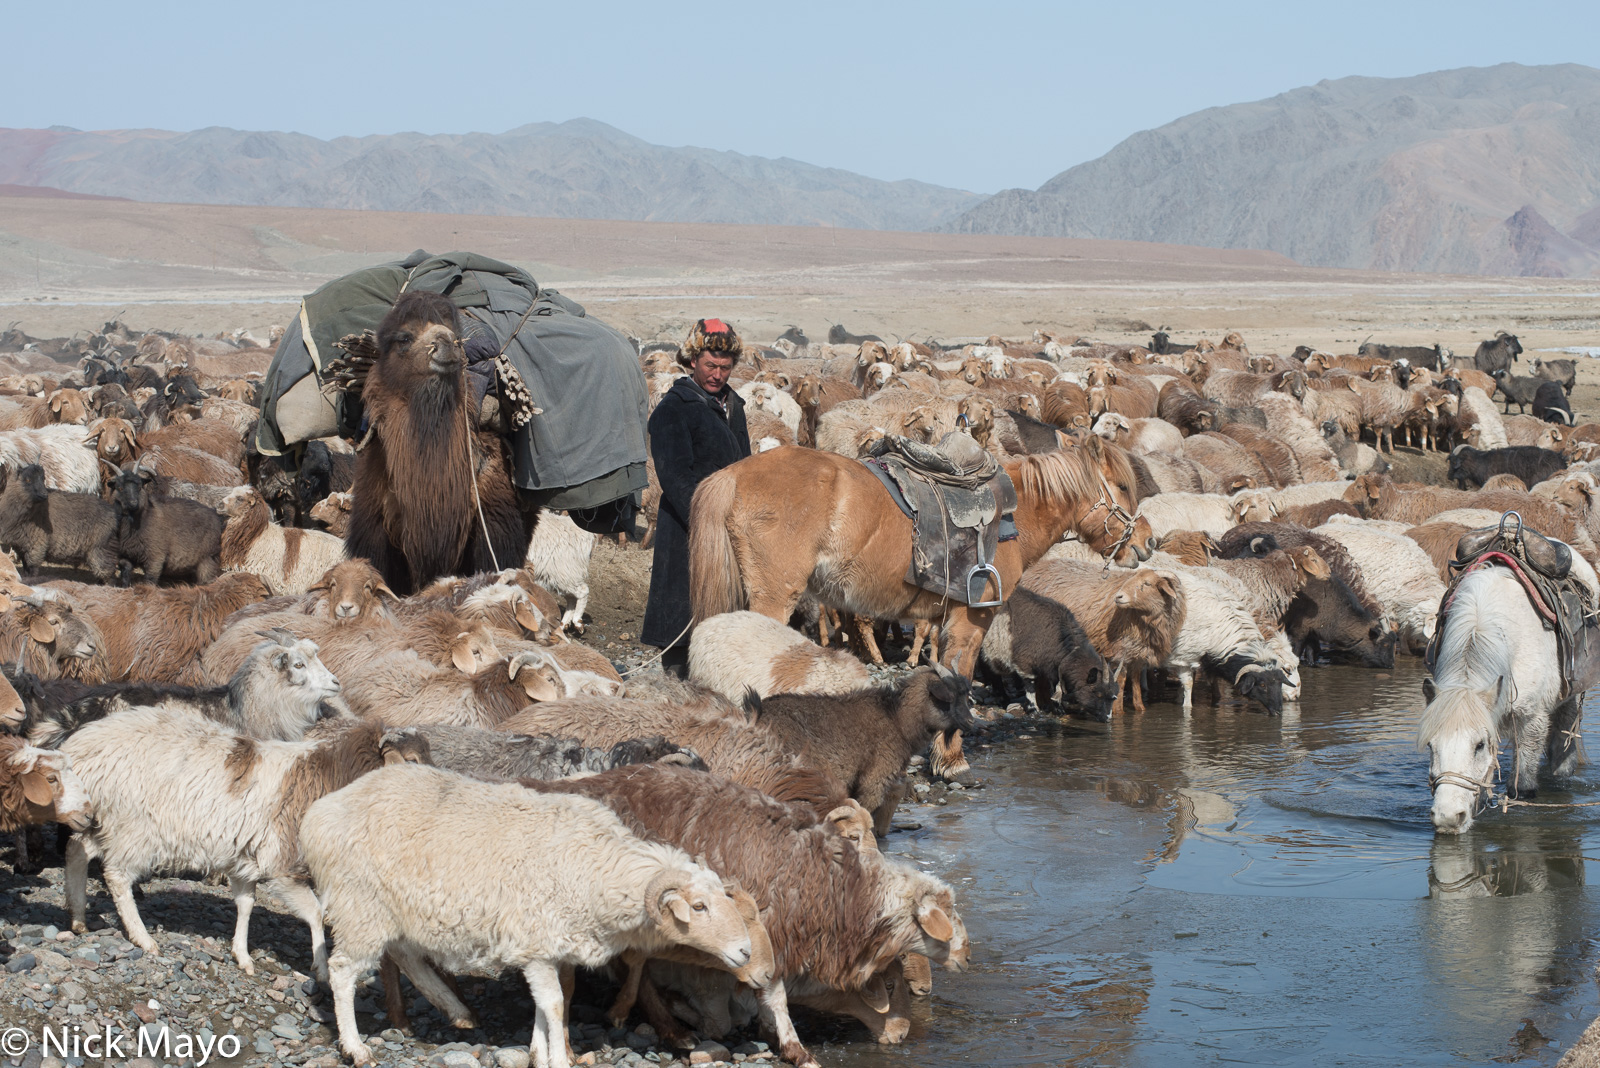 A herd of migrating sheep and goats drinking from a river during the spring migration in Sagsai sum watched over by a Kazakh...